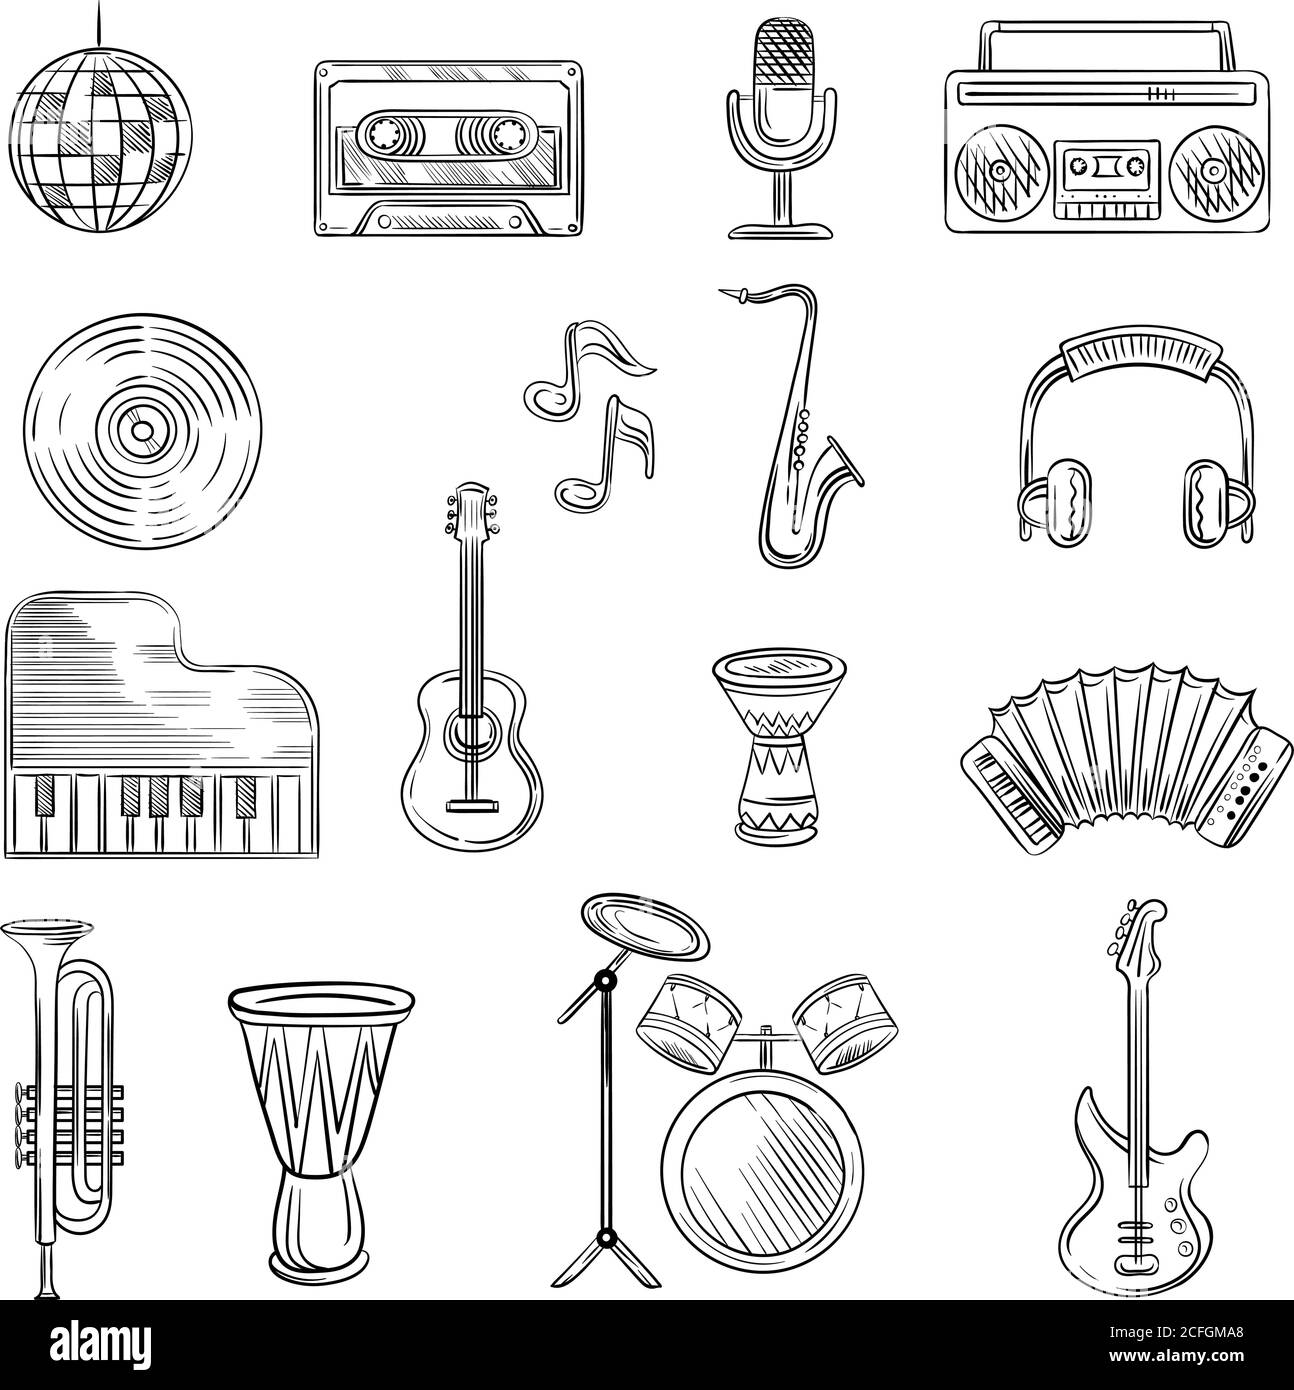 Music items icons set. Hand drawn sketch with notes, instruments, guitar, headphone, drums, music player Stock Vector